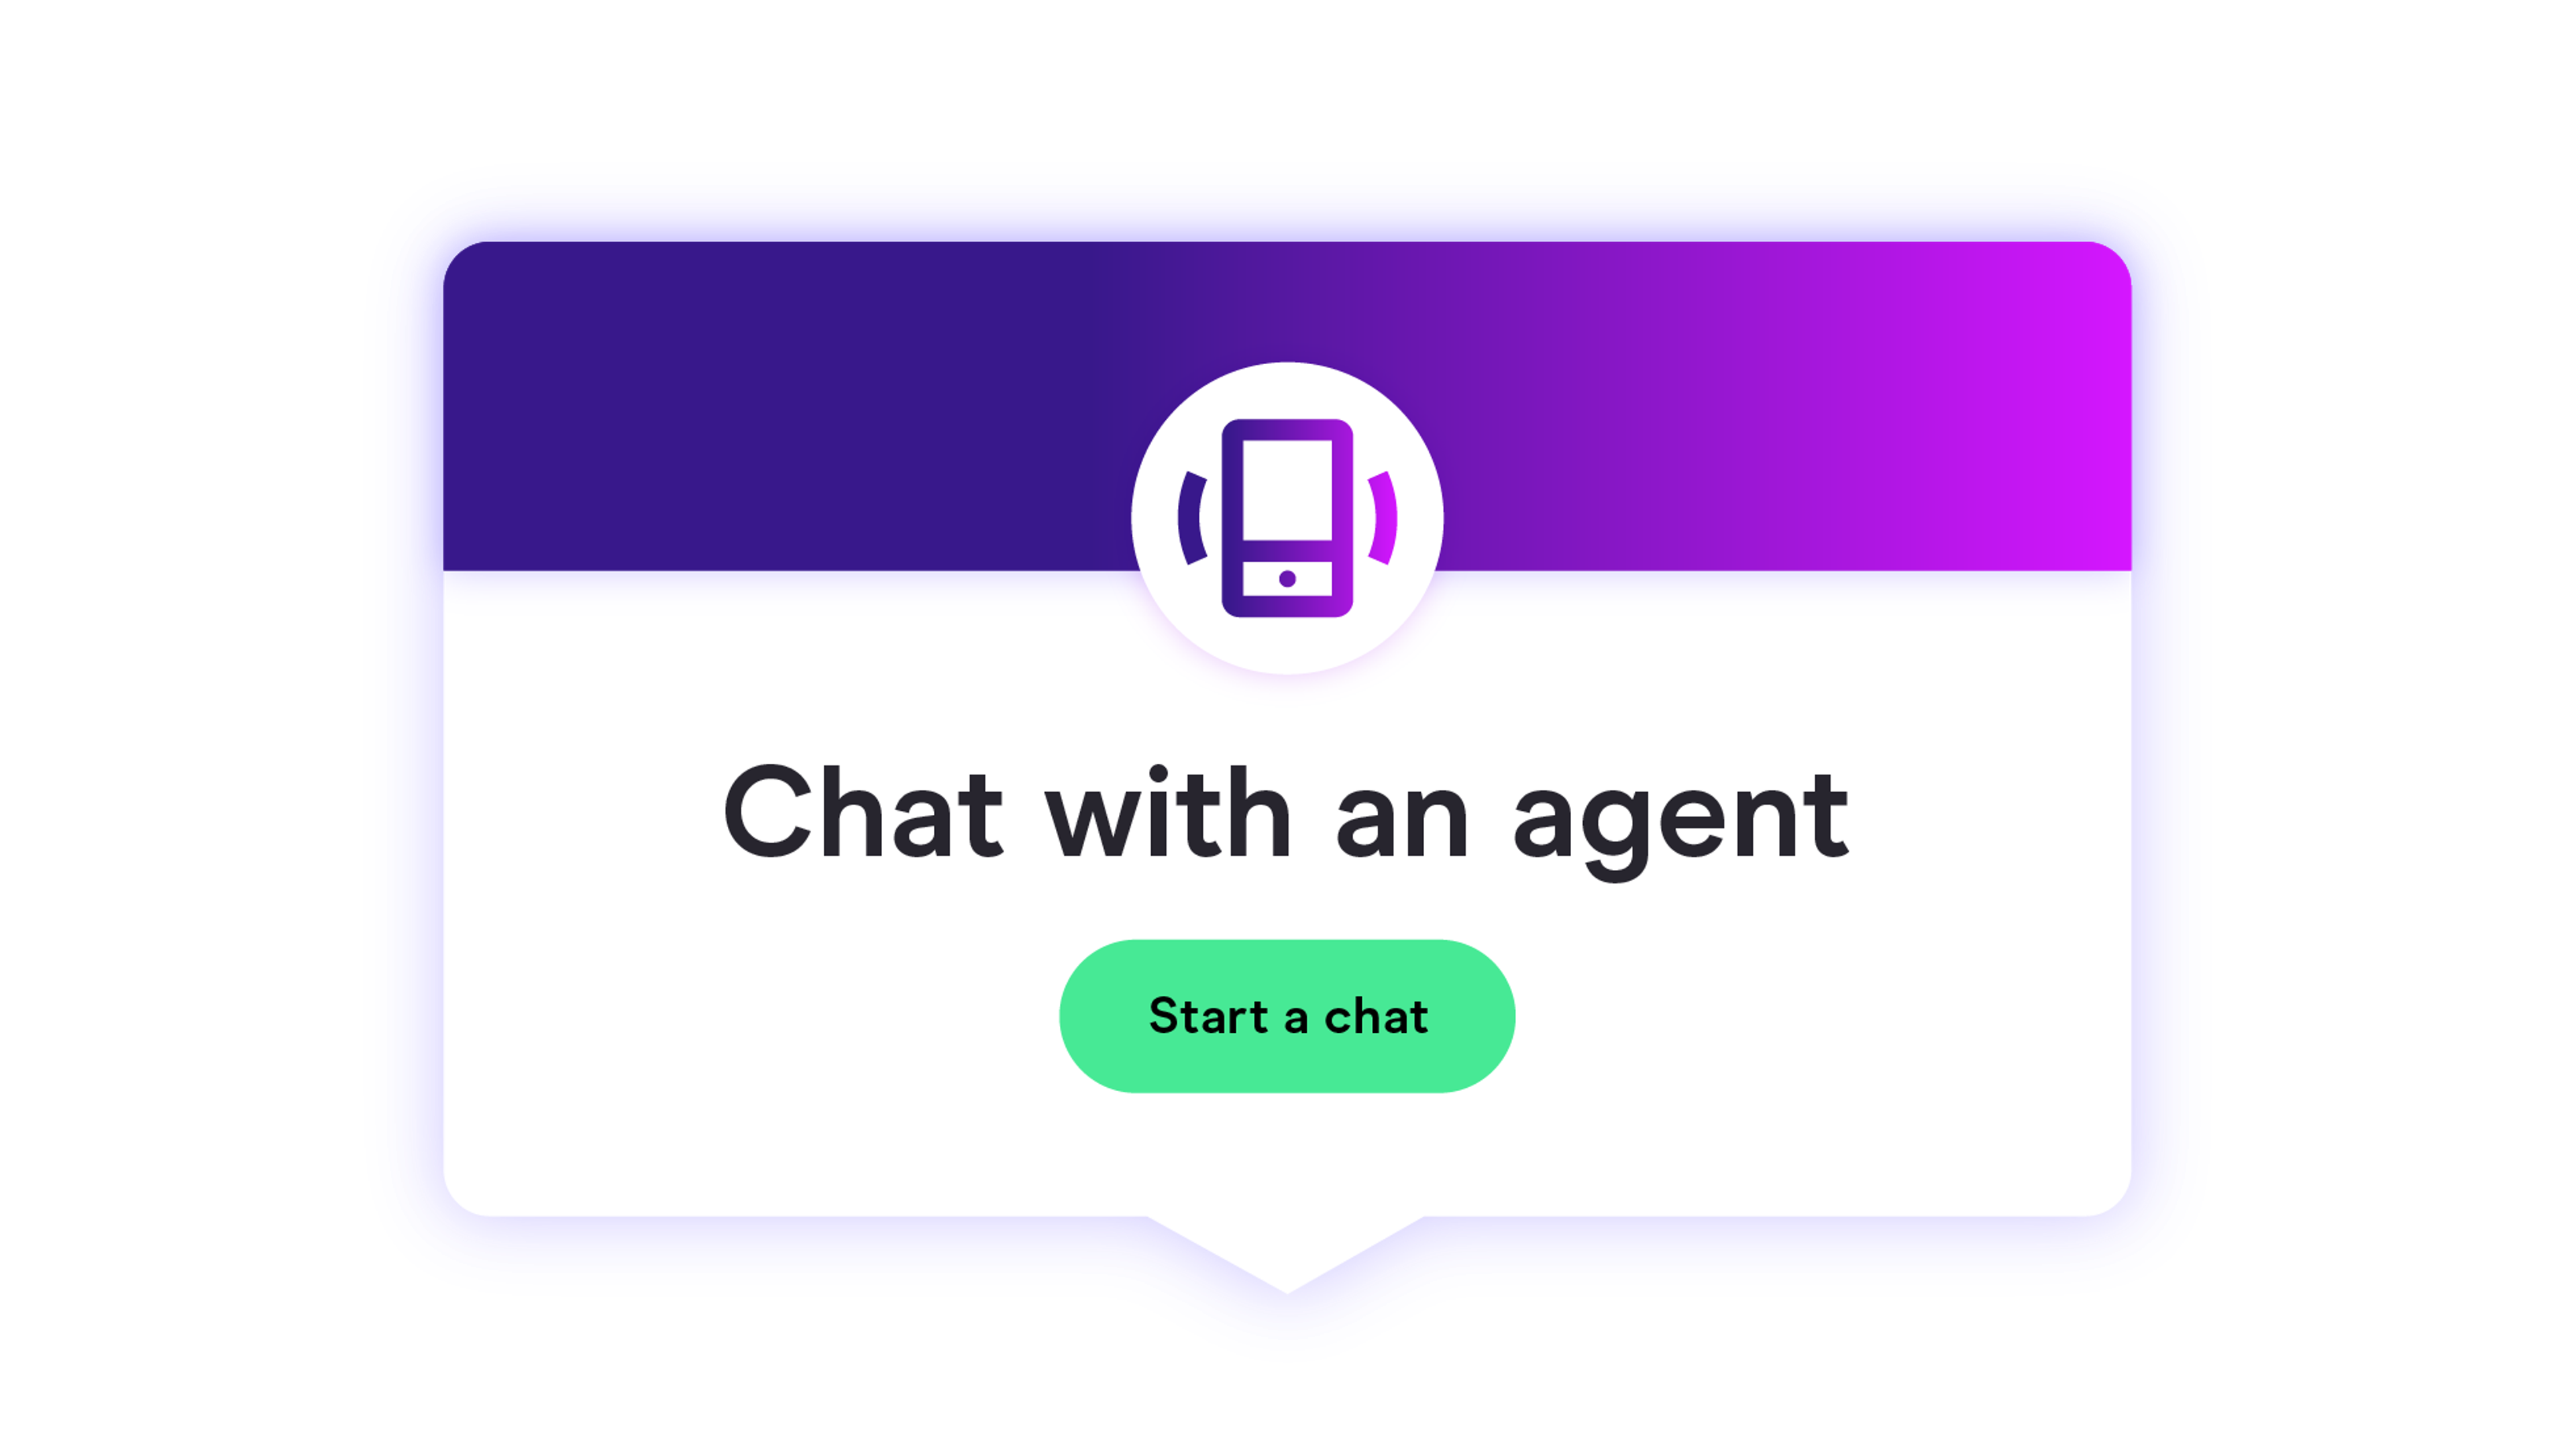 Zego live chat support pop up window